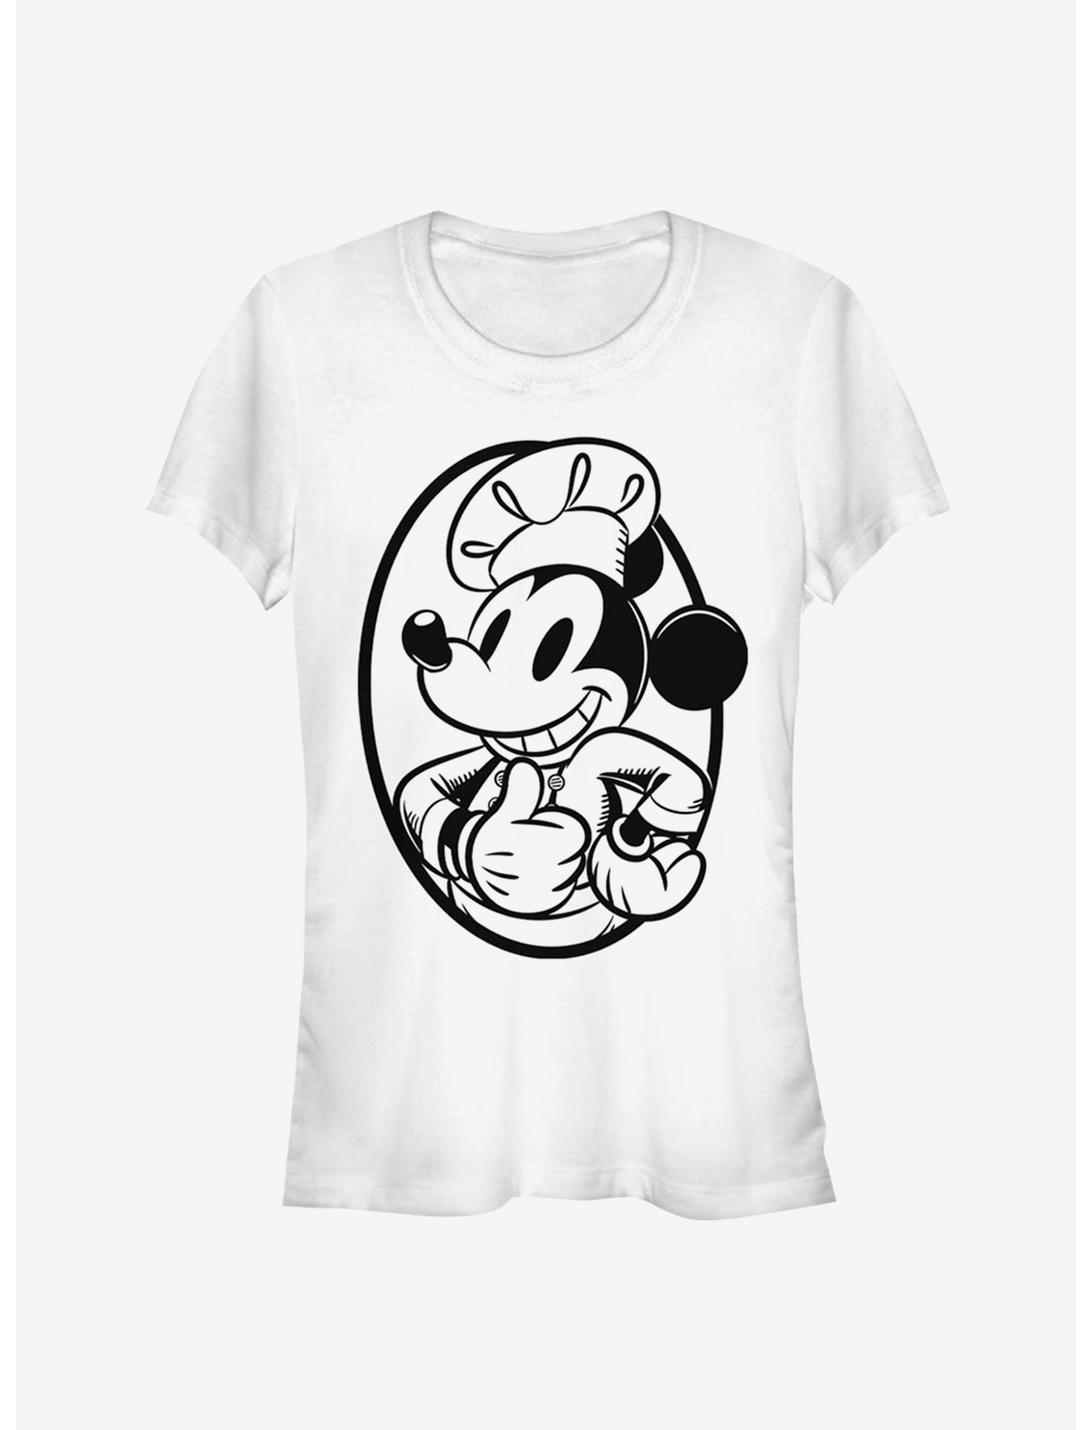 Disney Mickey Mouse Chef Classic Girls T-Shirt, WHITE, hi-res